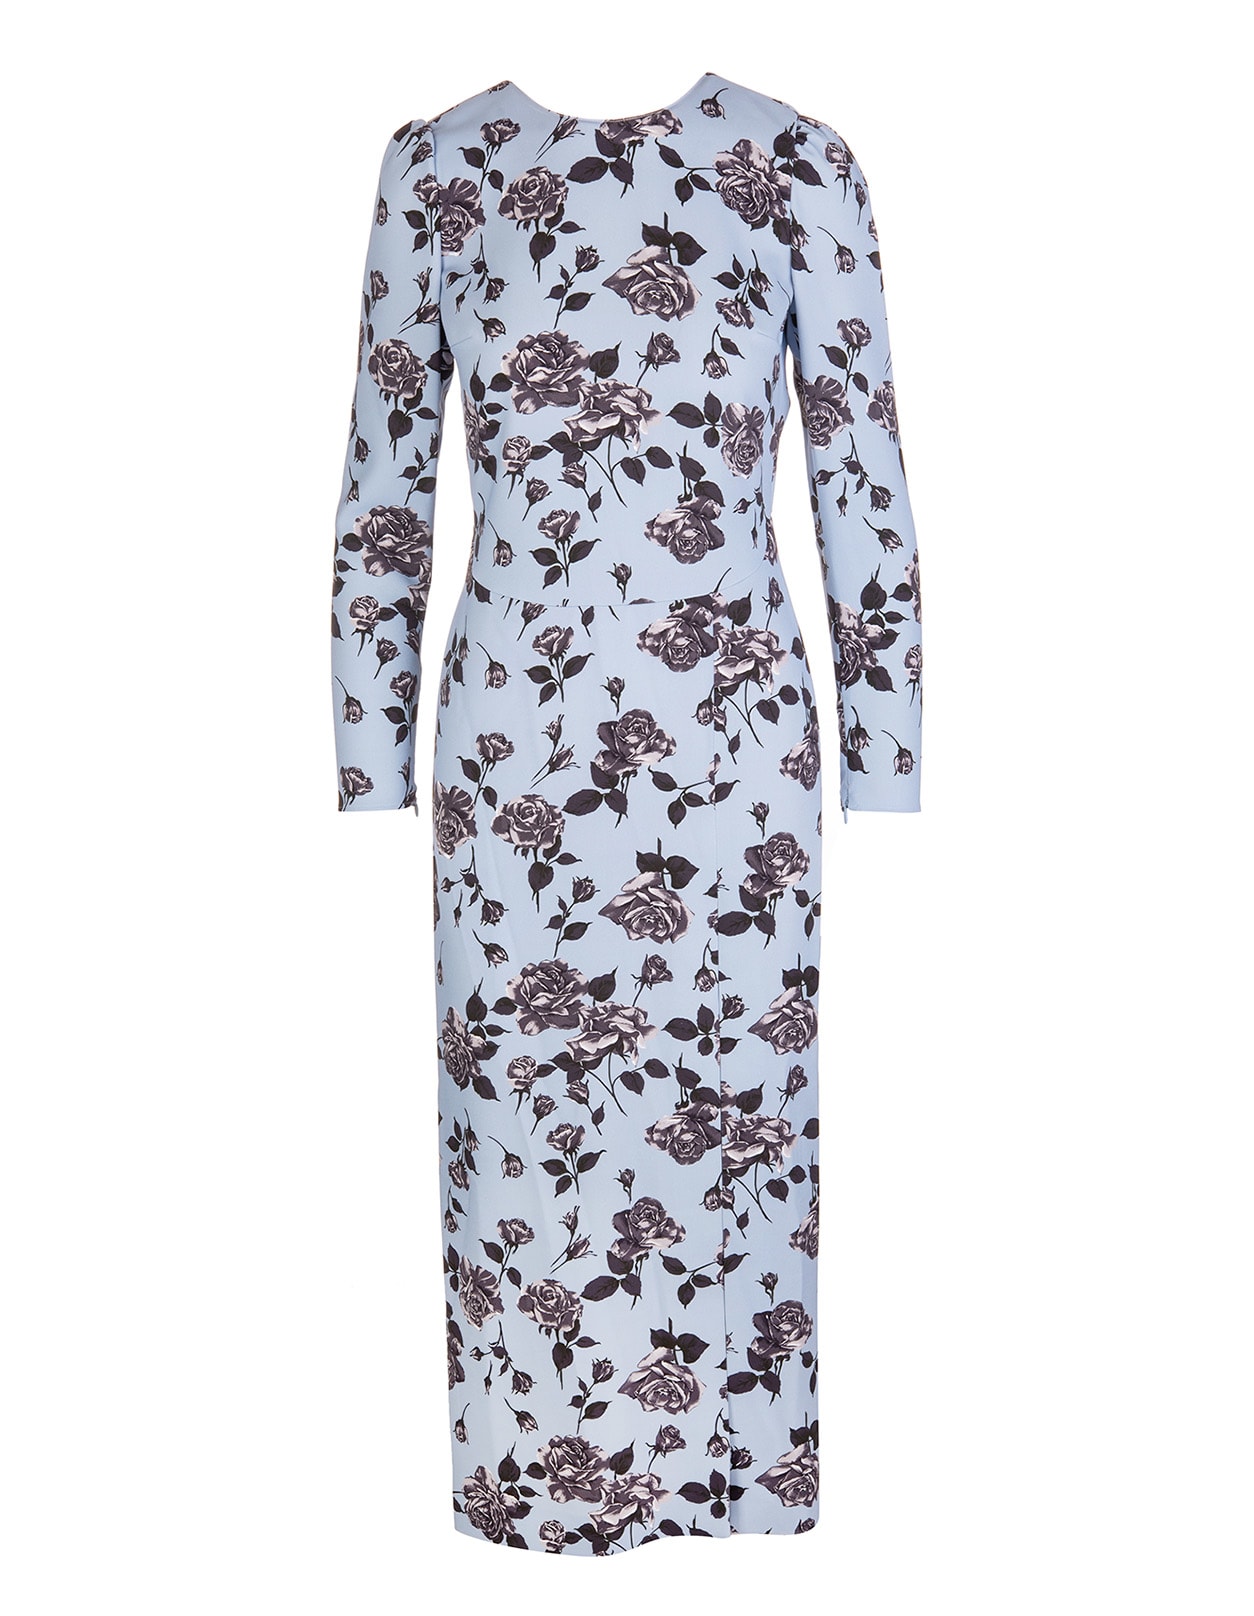 RED Valentino Long Light Blue Sheath Dress With Floral Print